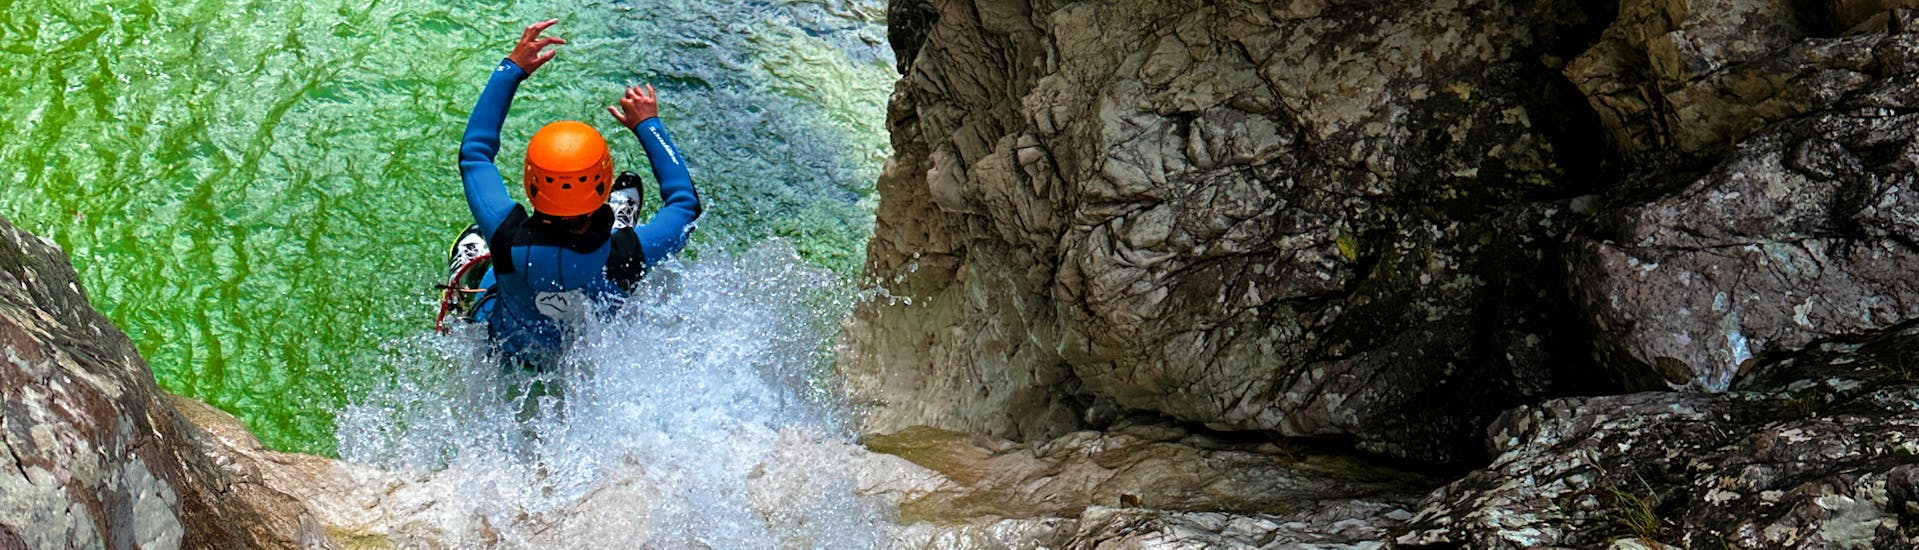 A participant in the water during Canyoning in the Fratarica Gorge near Bovec.